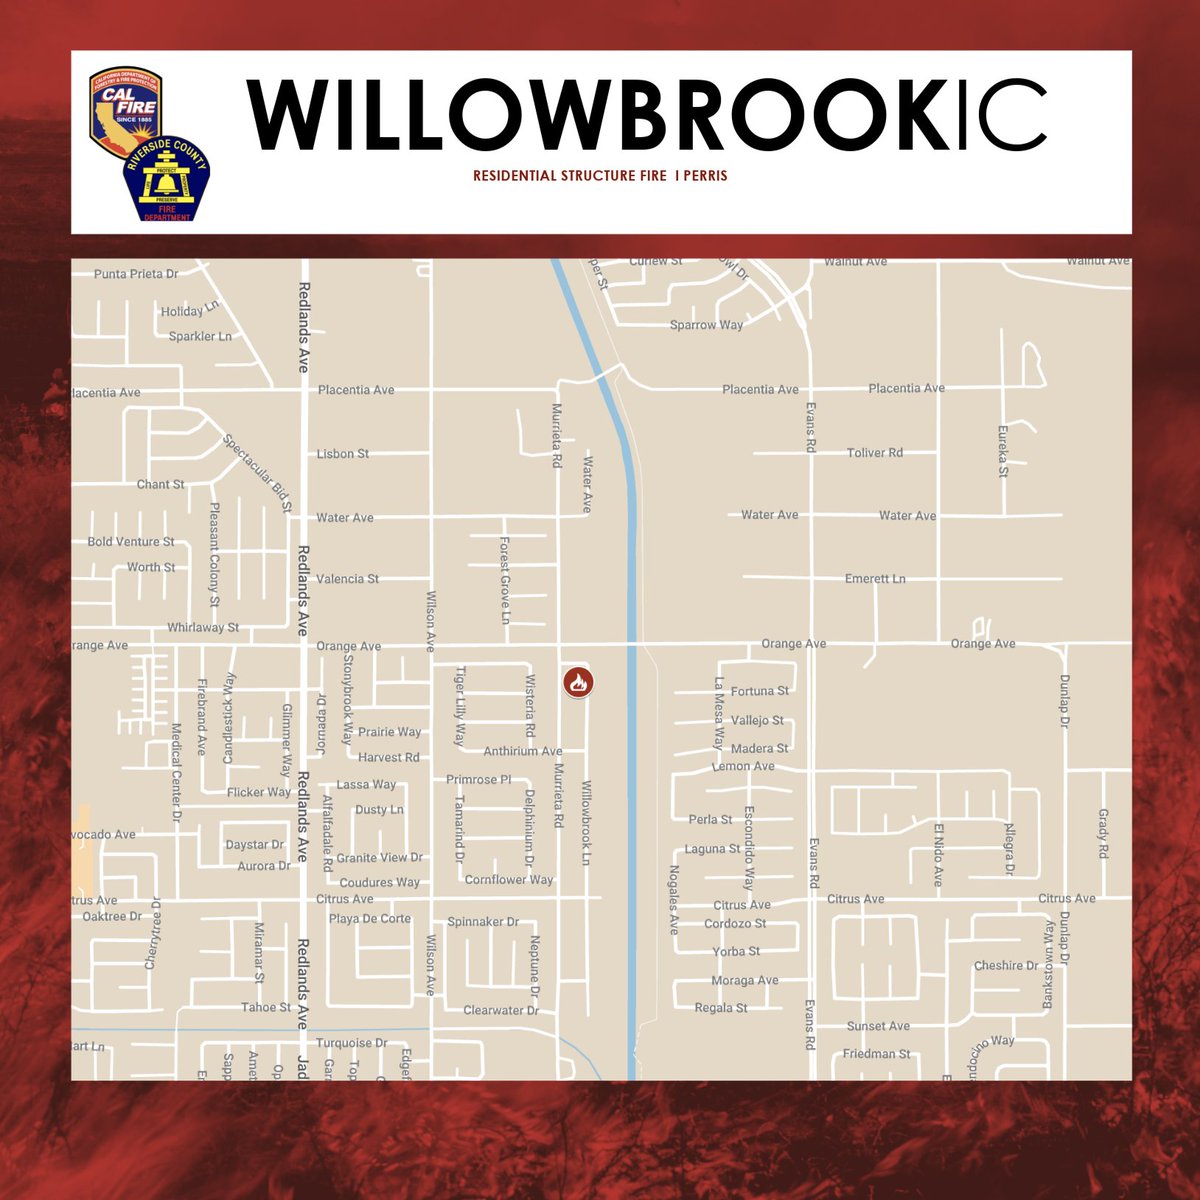 Residential Structure Fire:rpt@12:44 p.m. 2300 Block of Willowbrook Lane in Perris. Heavy smoke and fire from a two story, residential structure. The fire was knocked down at 1:24 p.m. and no injuries were reported. #WillowbrookIC @RivCoNow @CityofPerris